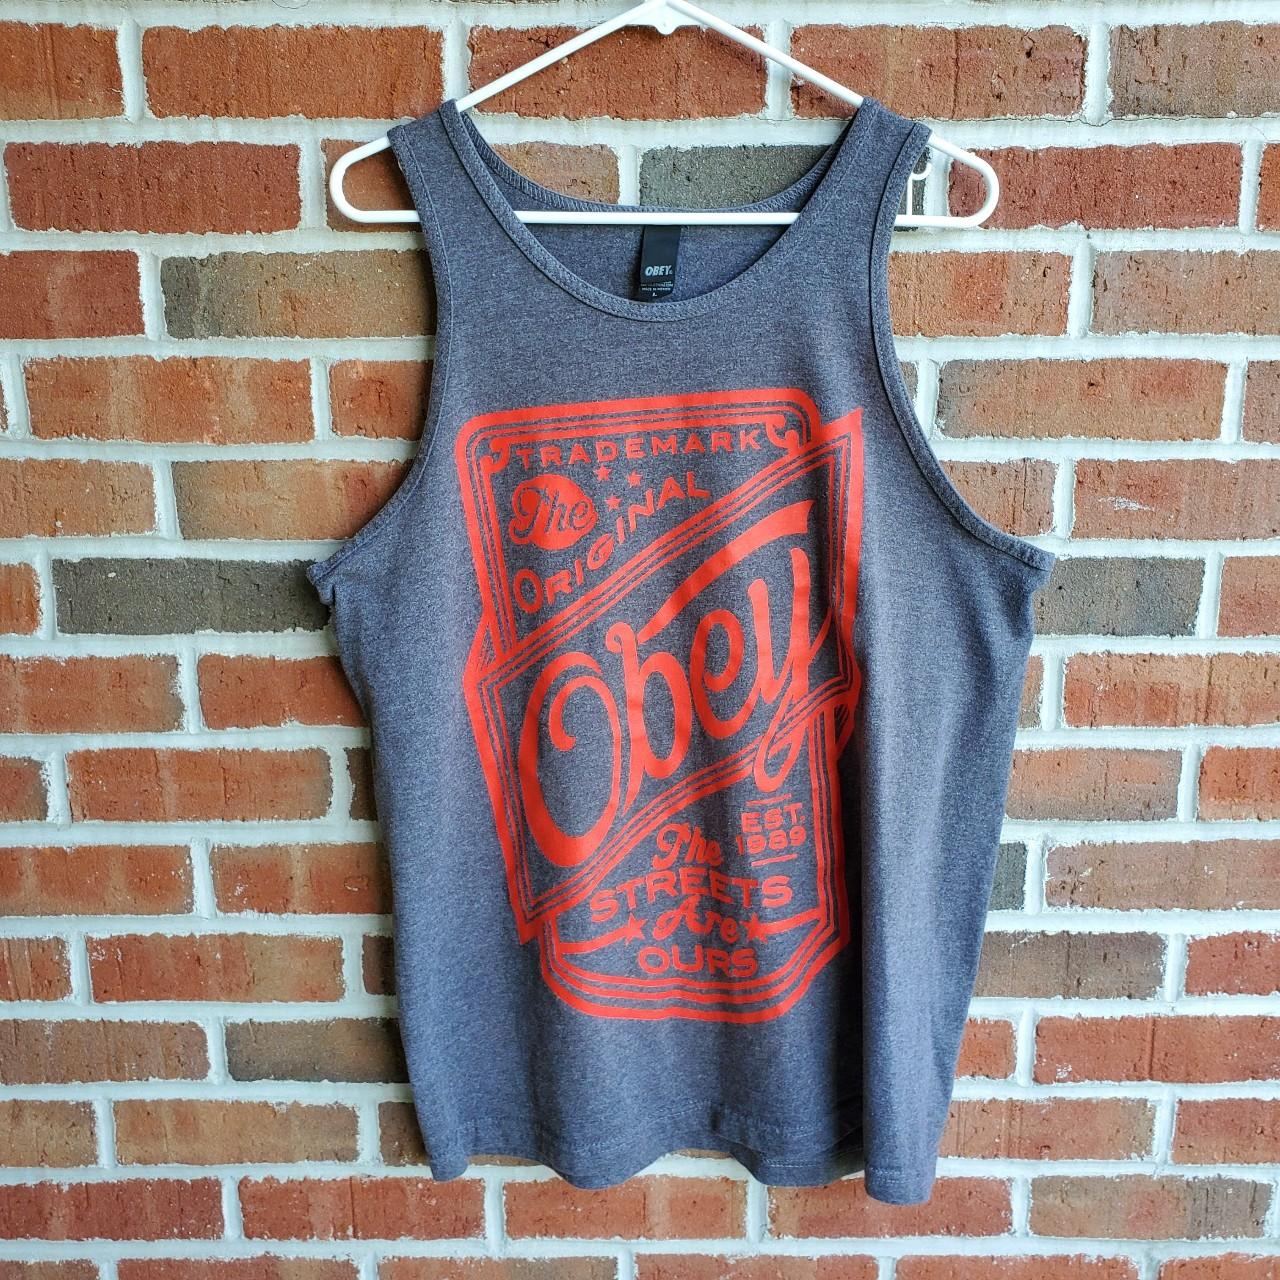 Obey The Streets Are Ours Tank Top Shirt Large Pit... - Depop